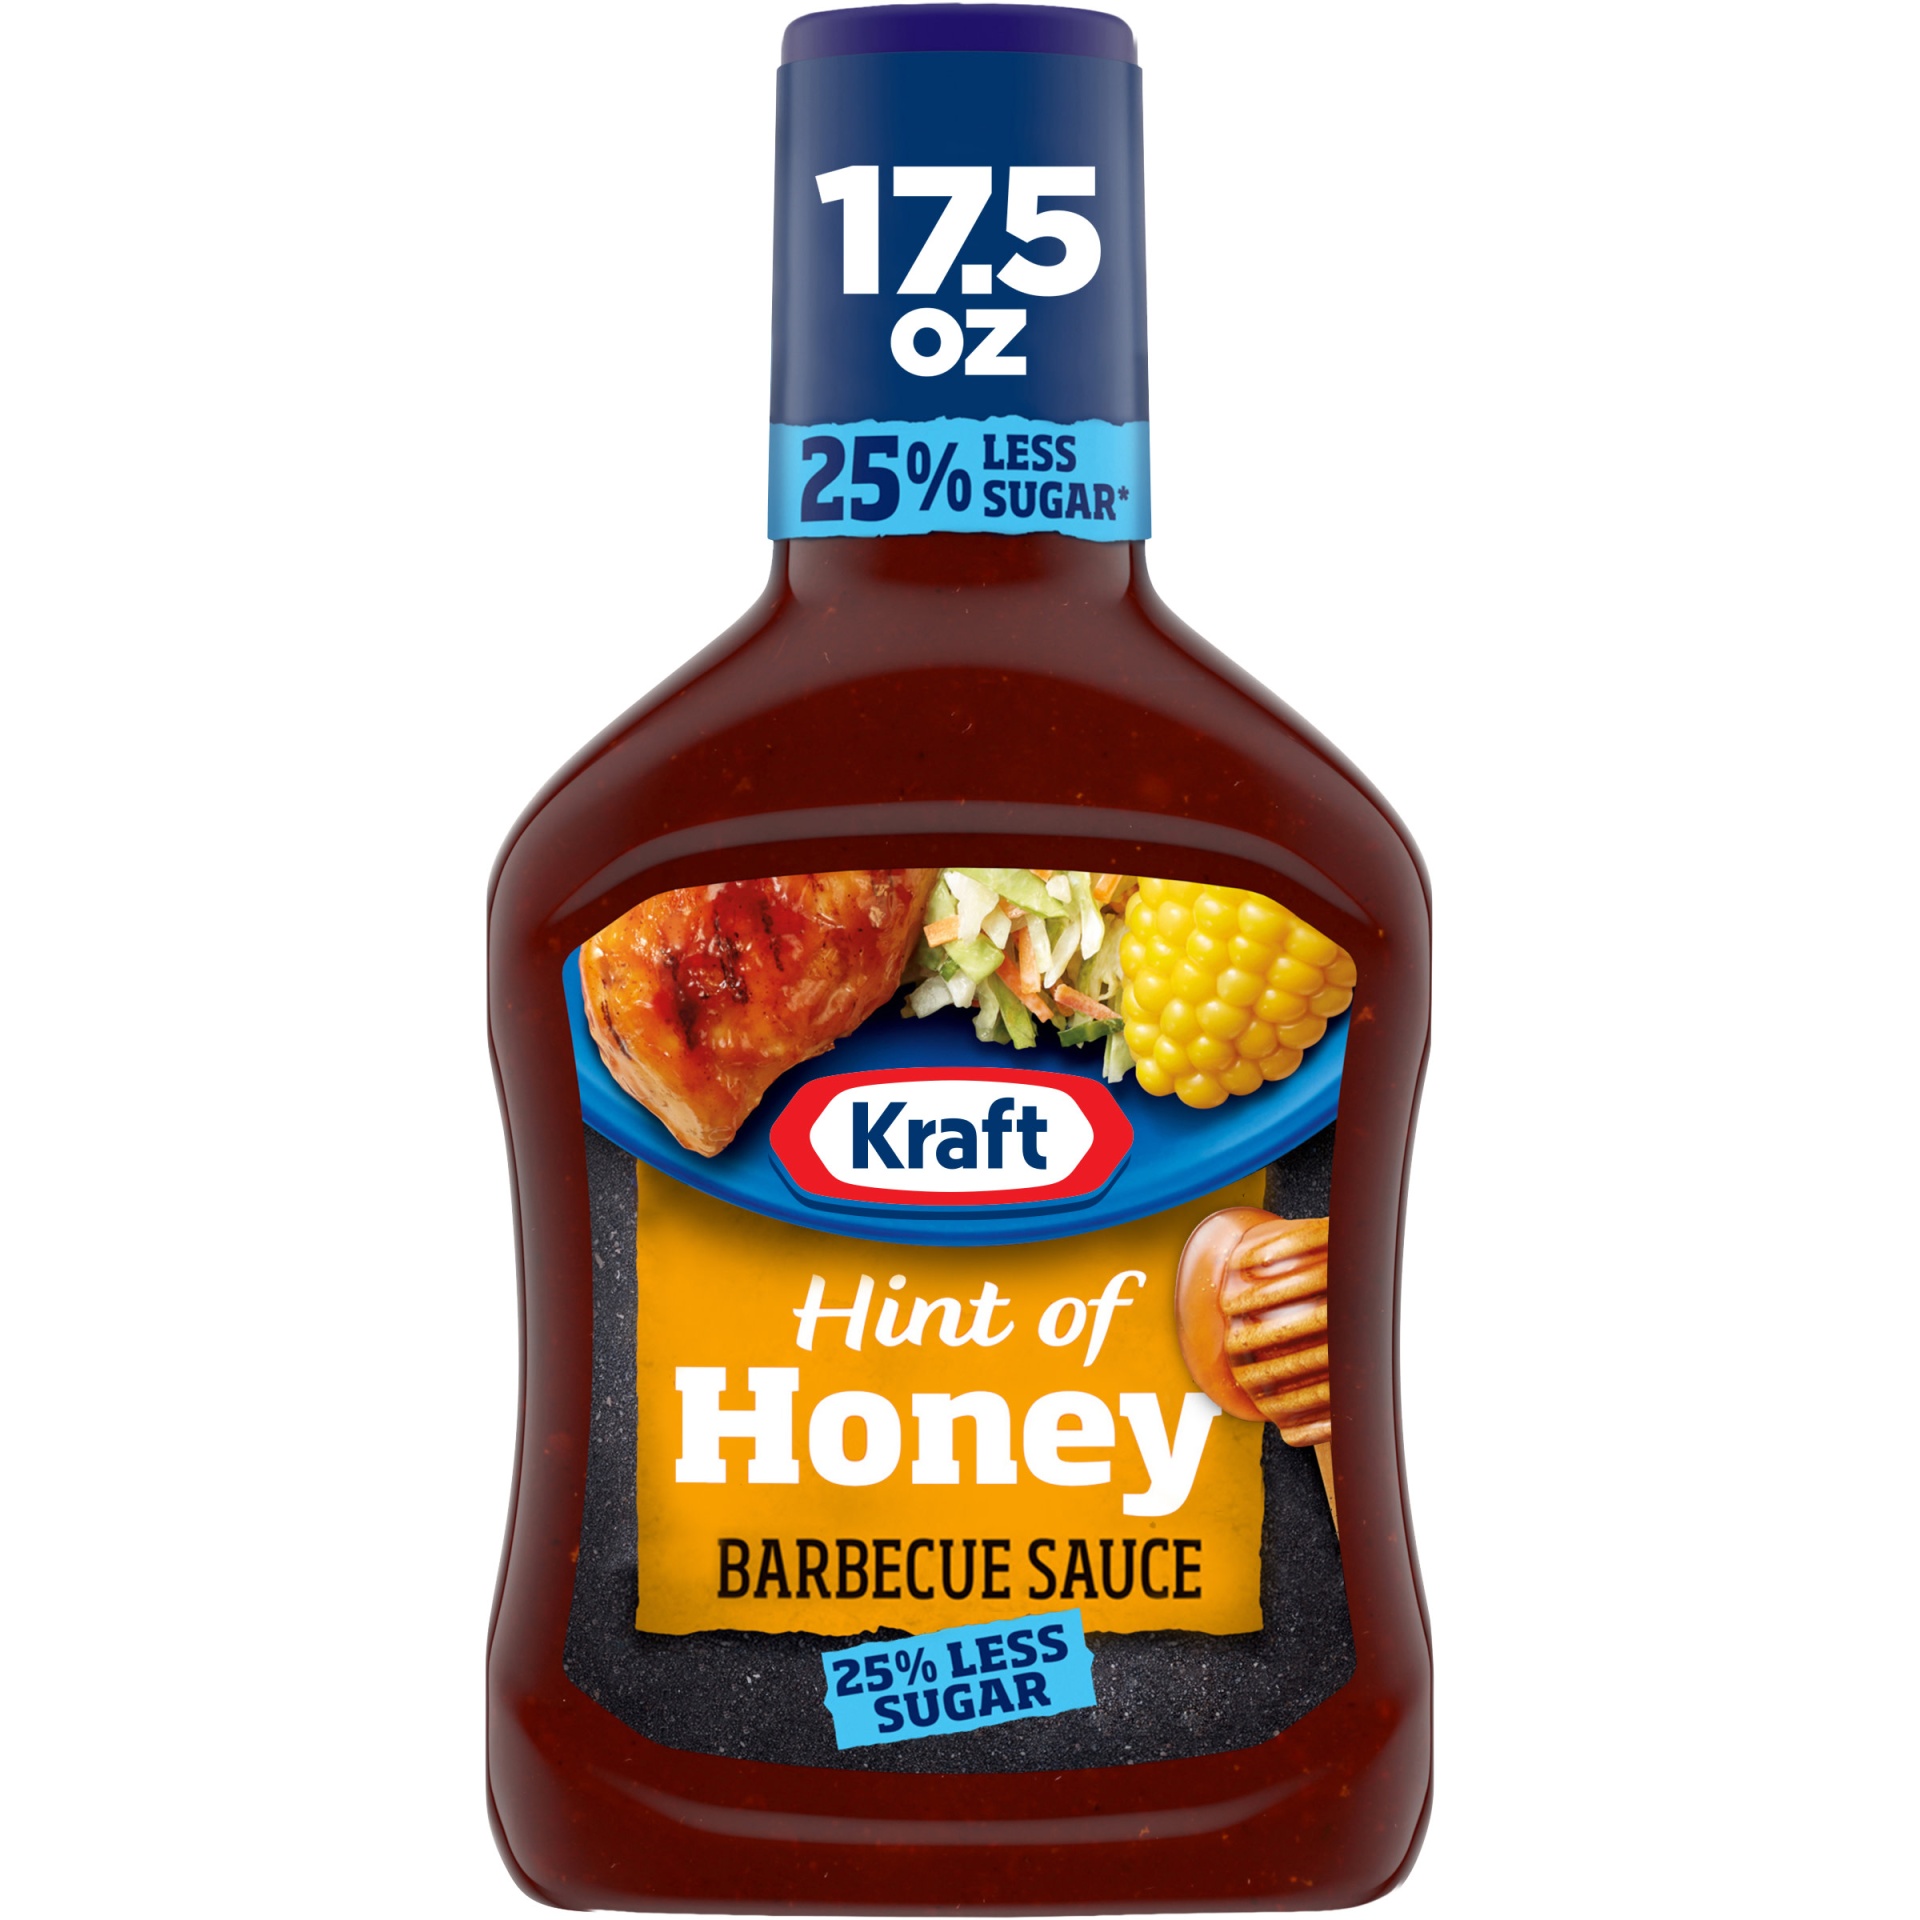 slide 1 of 7, Kraft Hint of Honey Barbecue Sauce with 25% Less Sugar Bottle, 17.5 oz